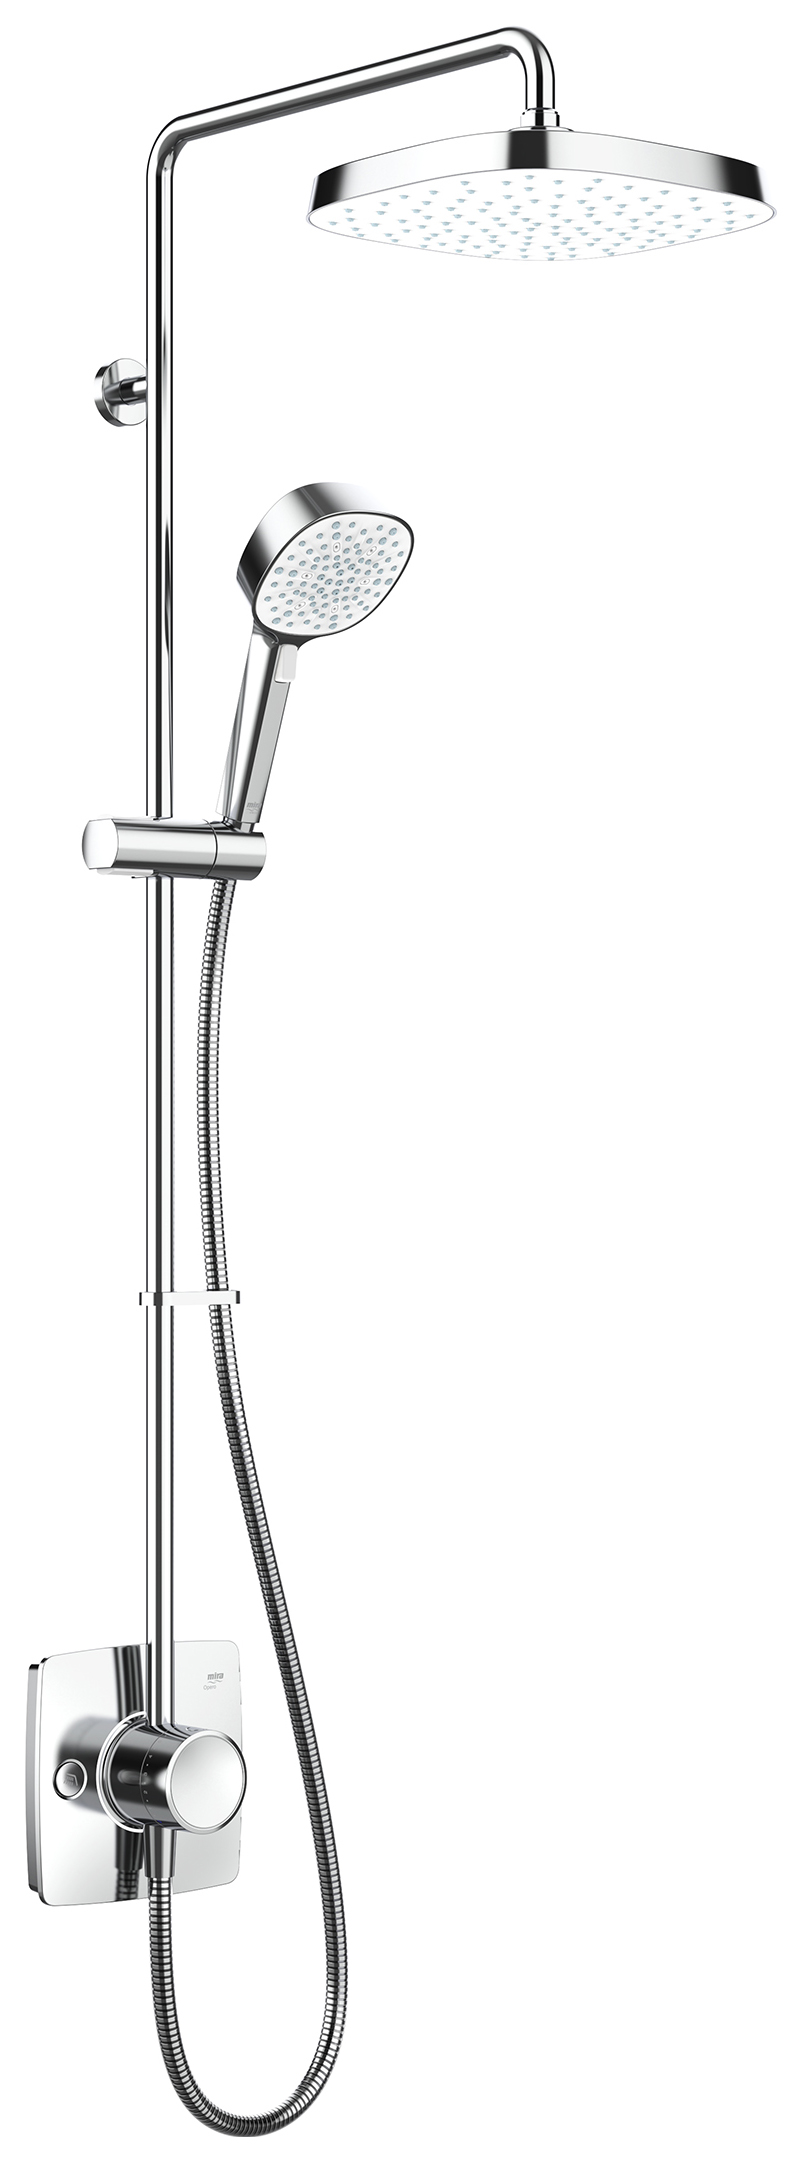 Image of Mira Opero Dual Outlet Mixer Shower with HydroGlo Technology - Chrome